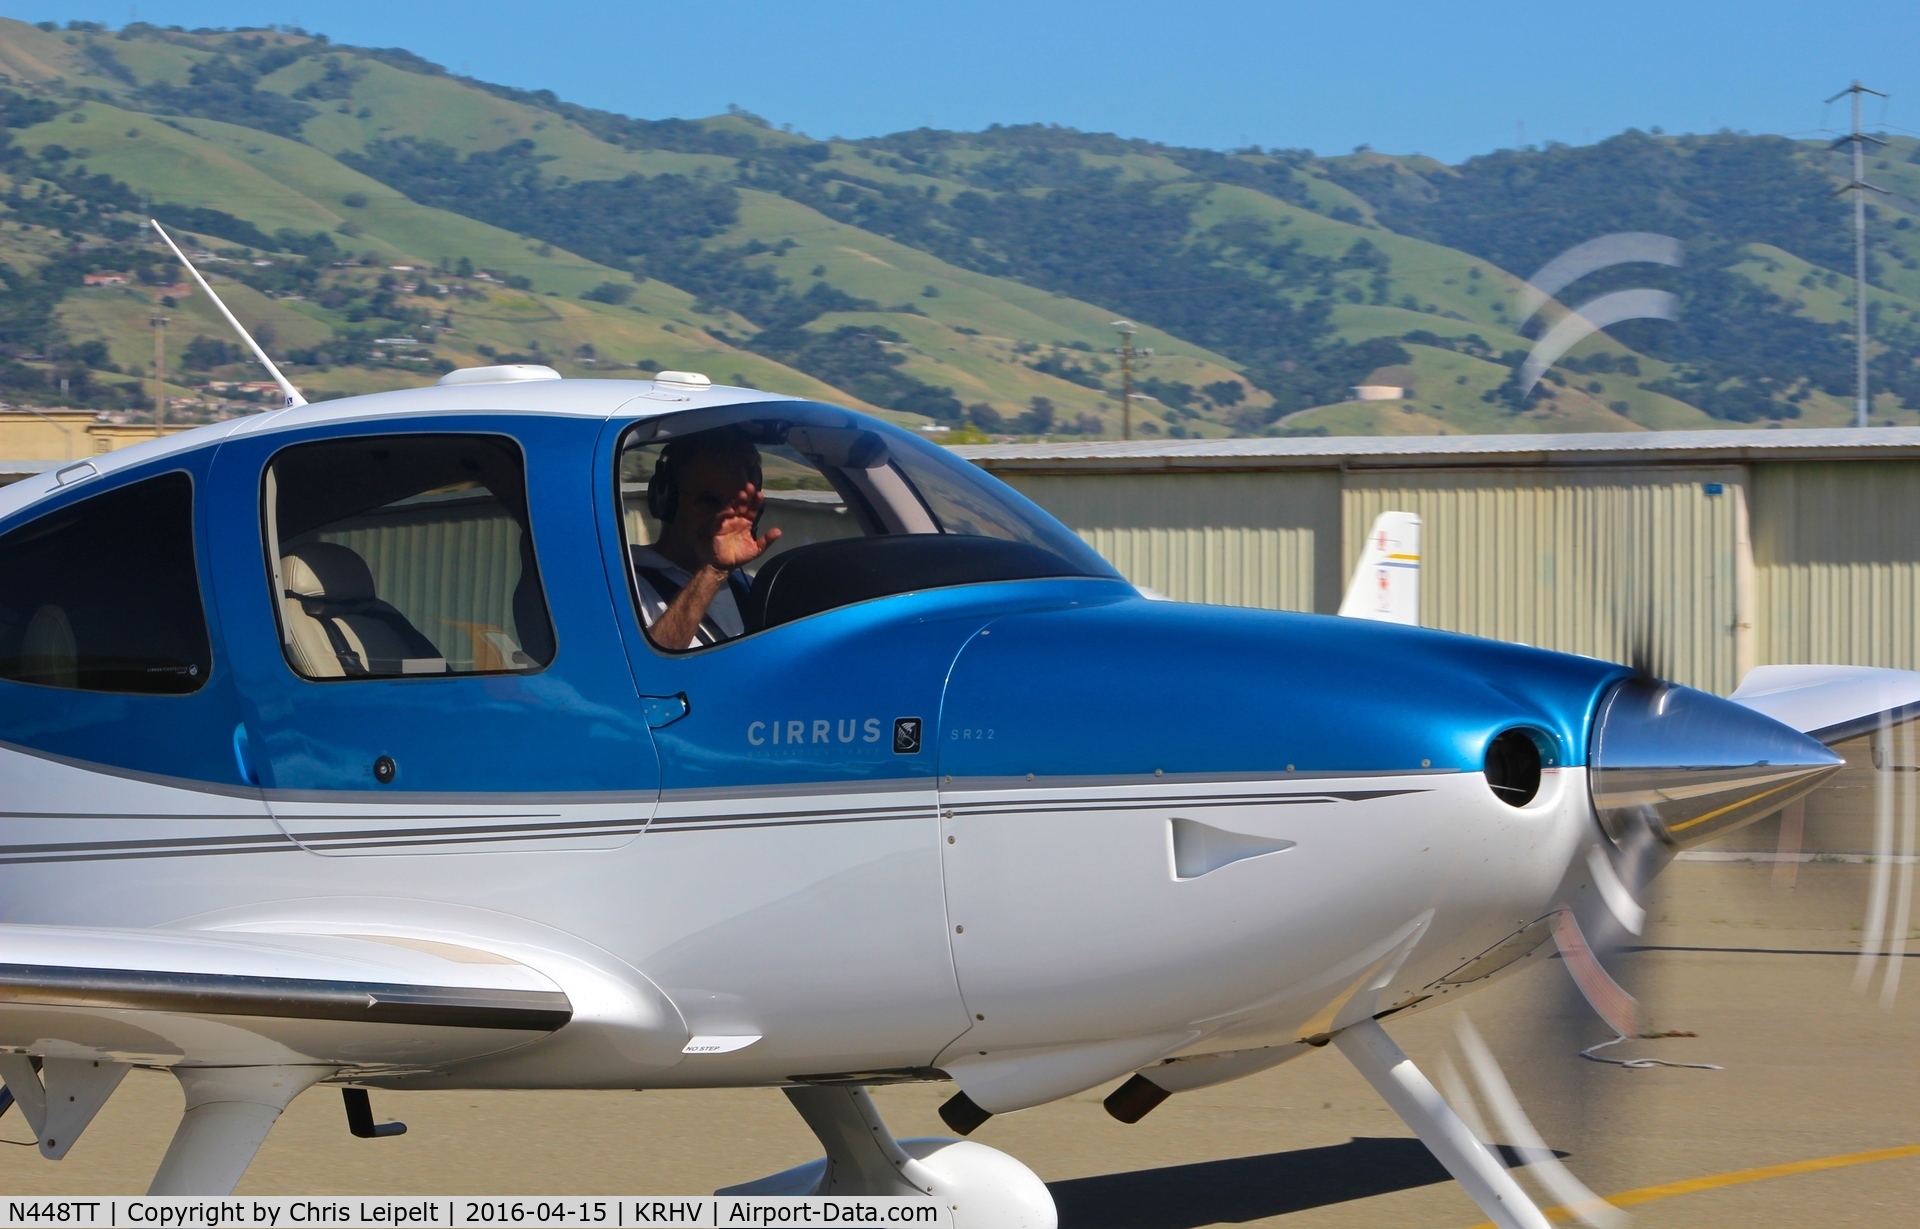 N448TT, 2008 Cirrus SR22 G3 GTSX Turbo C/N 3073, Locally-based 2008 Cirrus SR22 G3 Turbo taxing out for a VFR departure at Reid Hillview Airport, San Jose, CA. Thanks for the wave! 